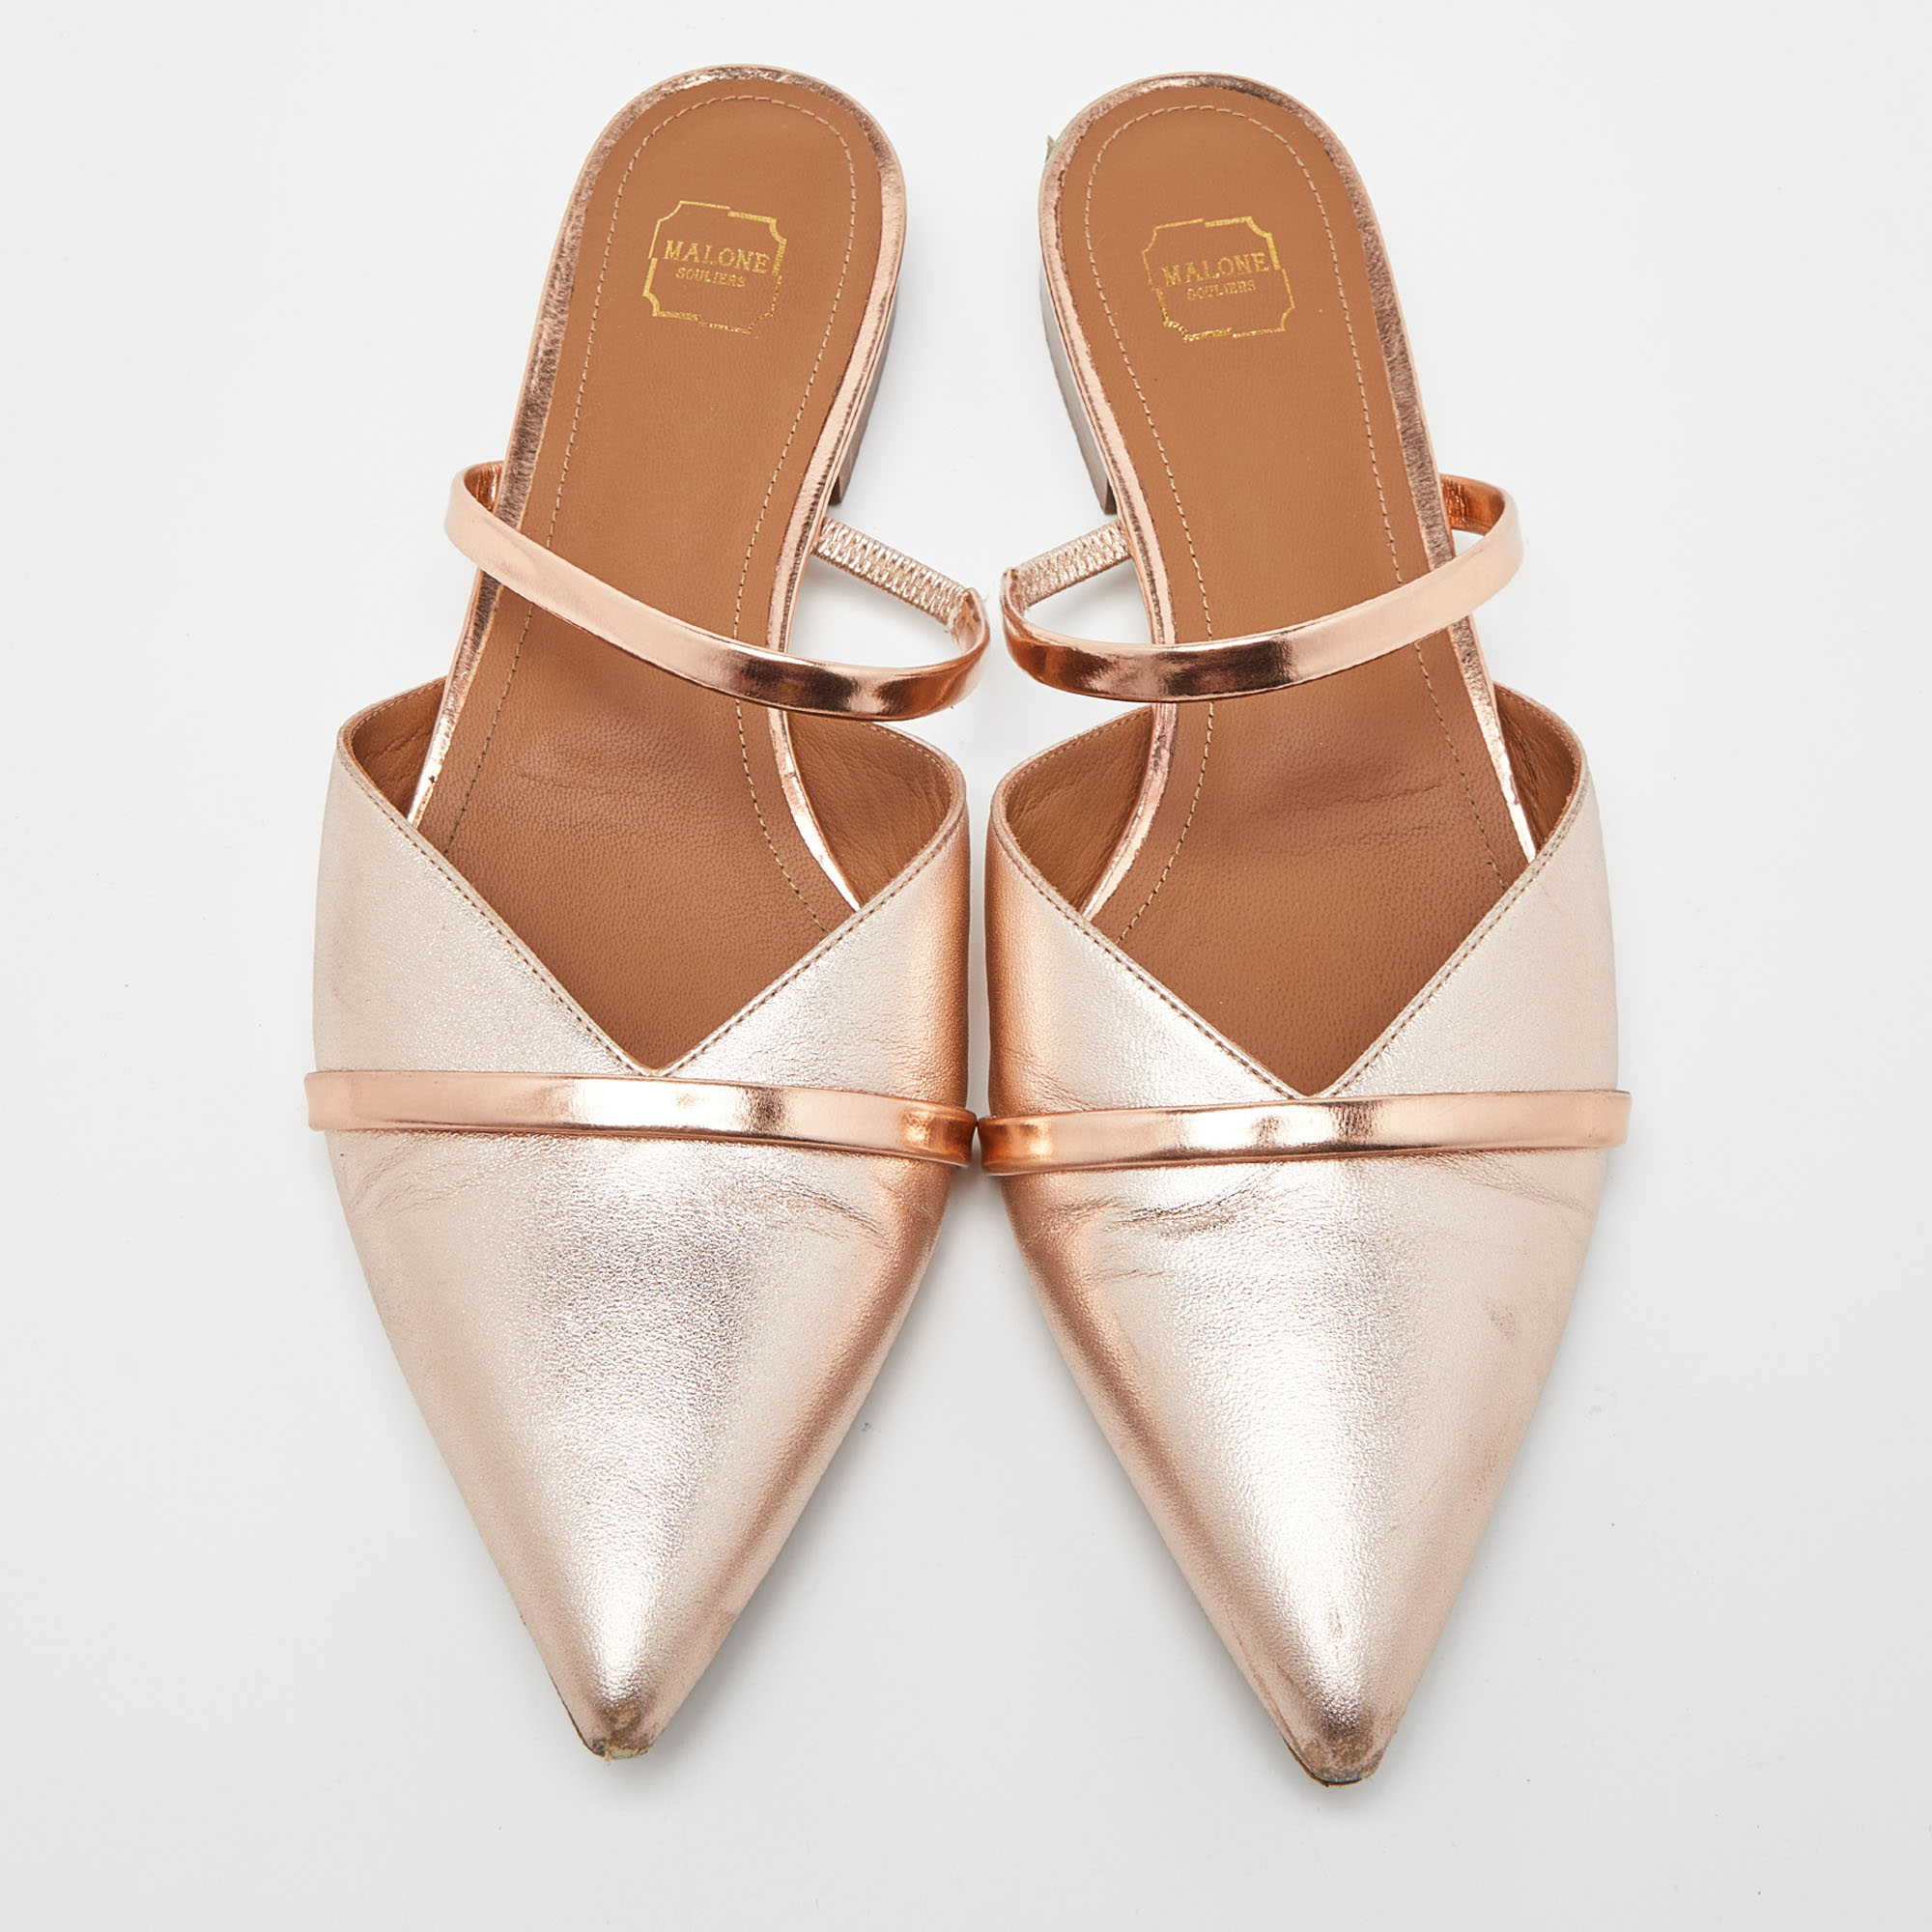 Malone Souliers Rose Gold Leather Frankie Mary Jane Flat Mules Size 39